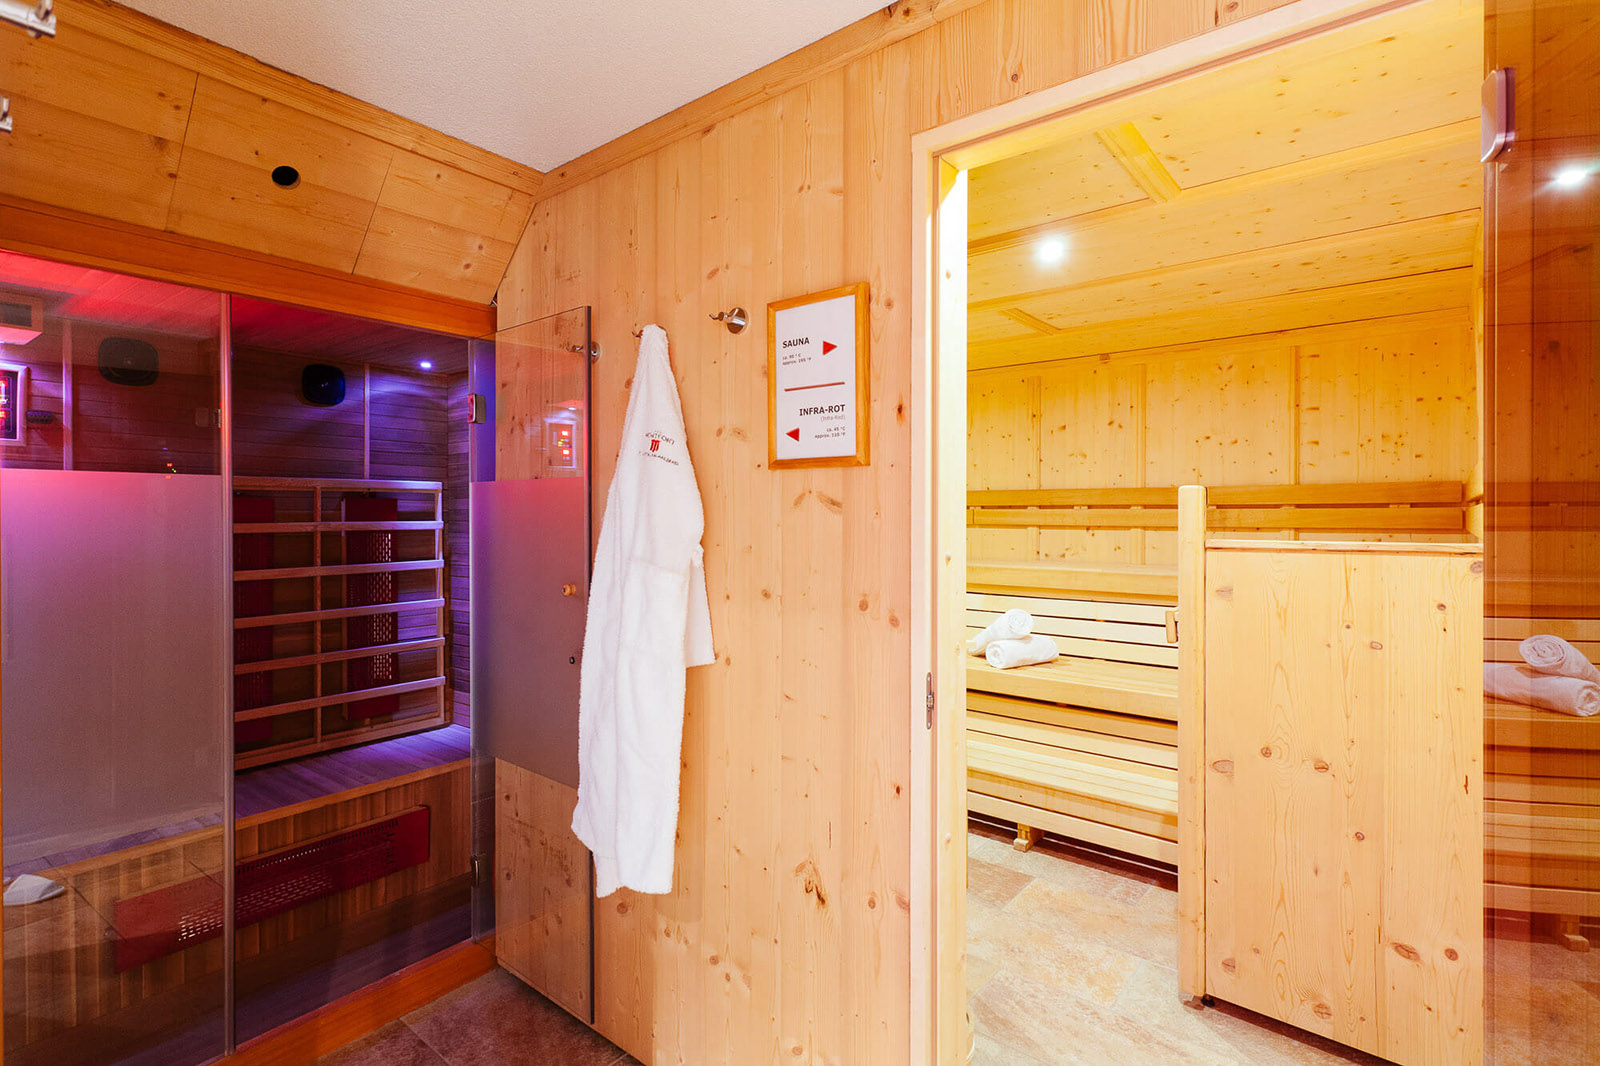  Sauna, infrared cabin and more for your relaxation